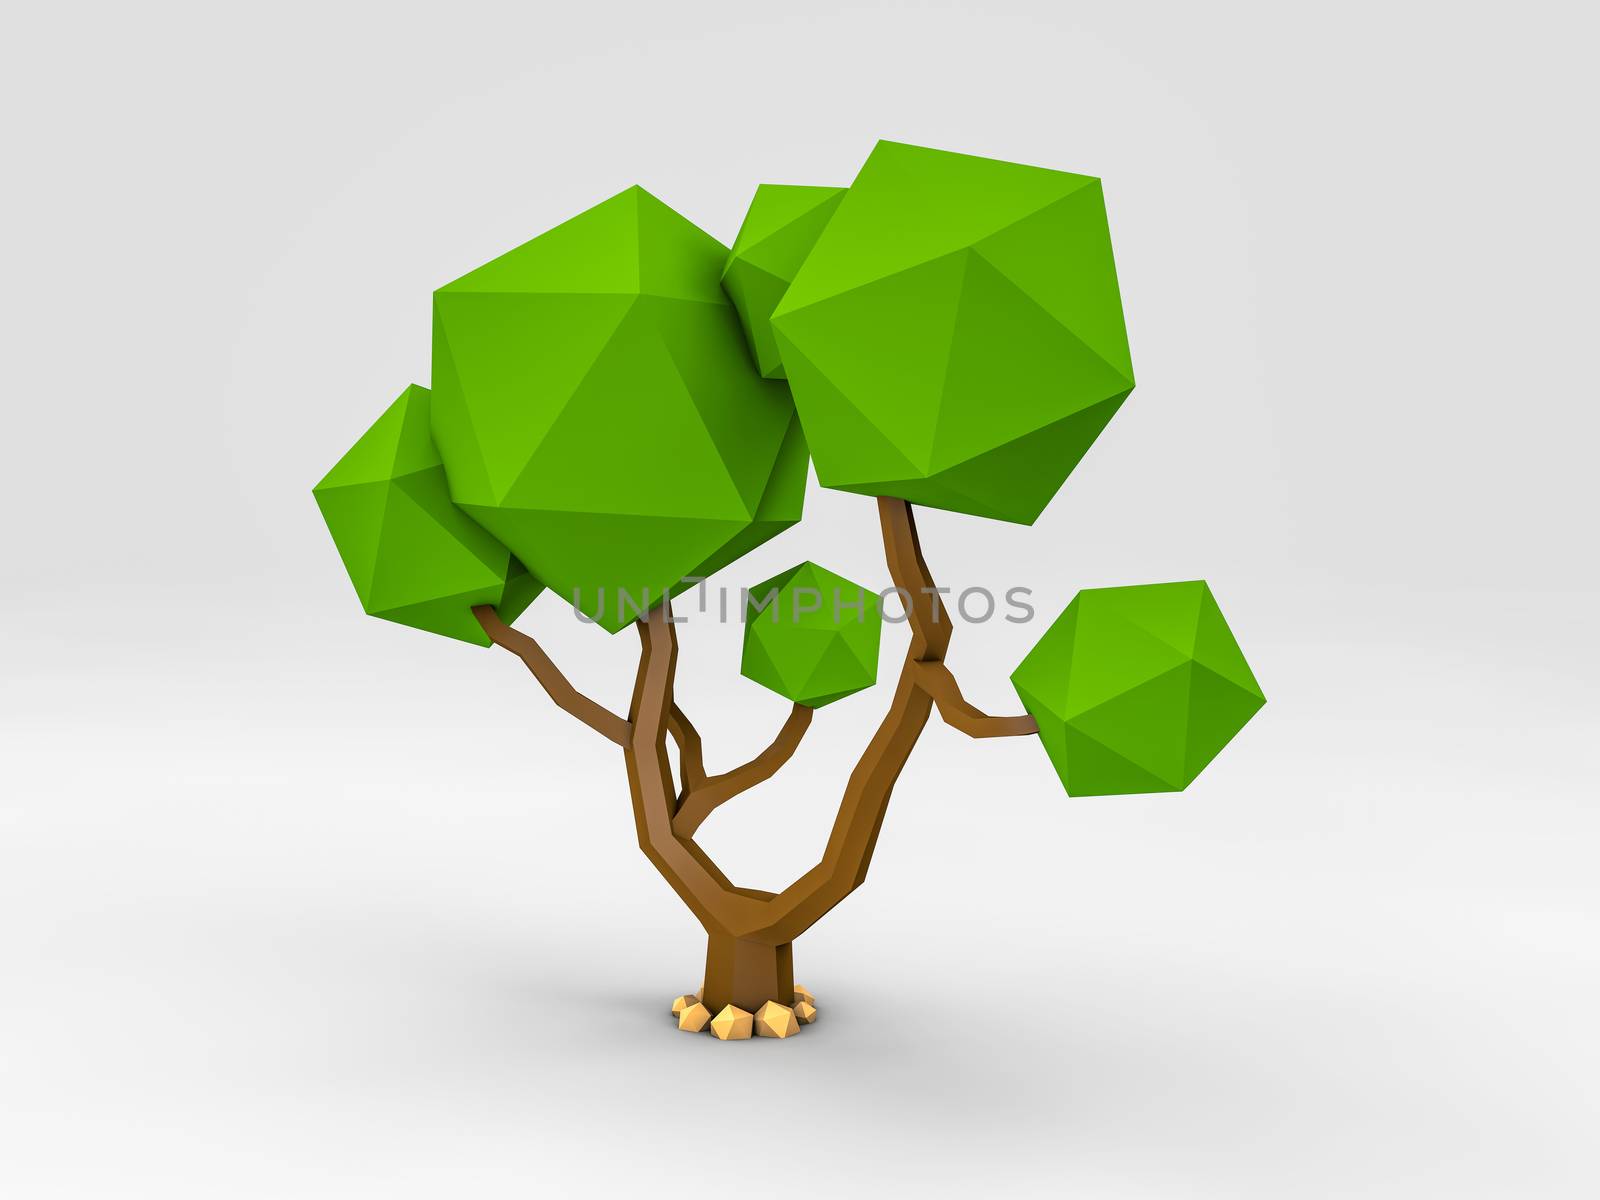 3d Rendering of tree in low poly style, clipping path included.